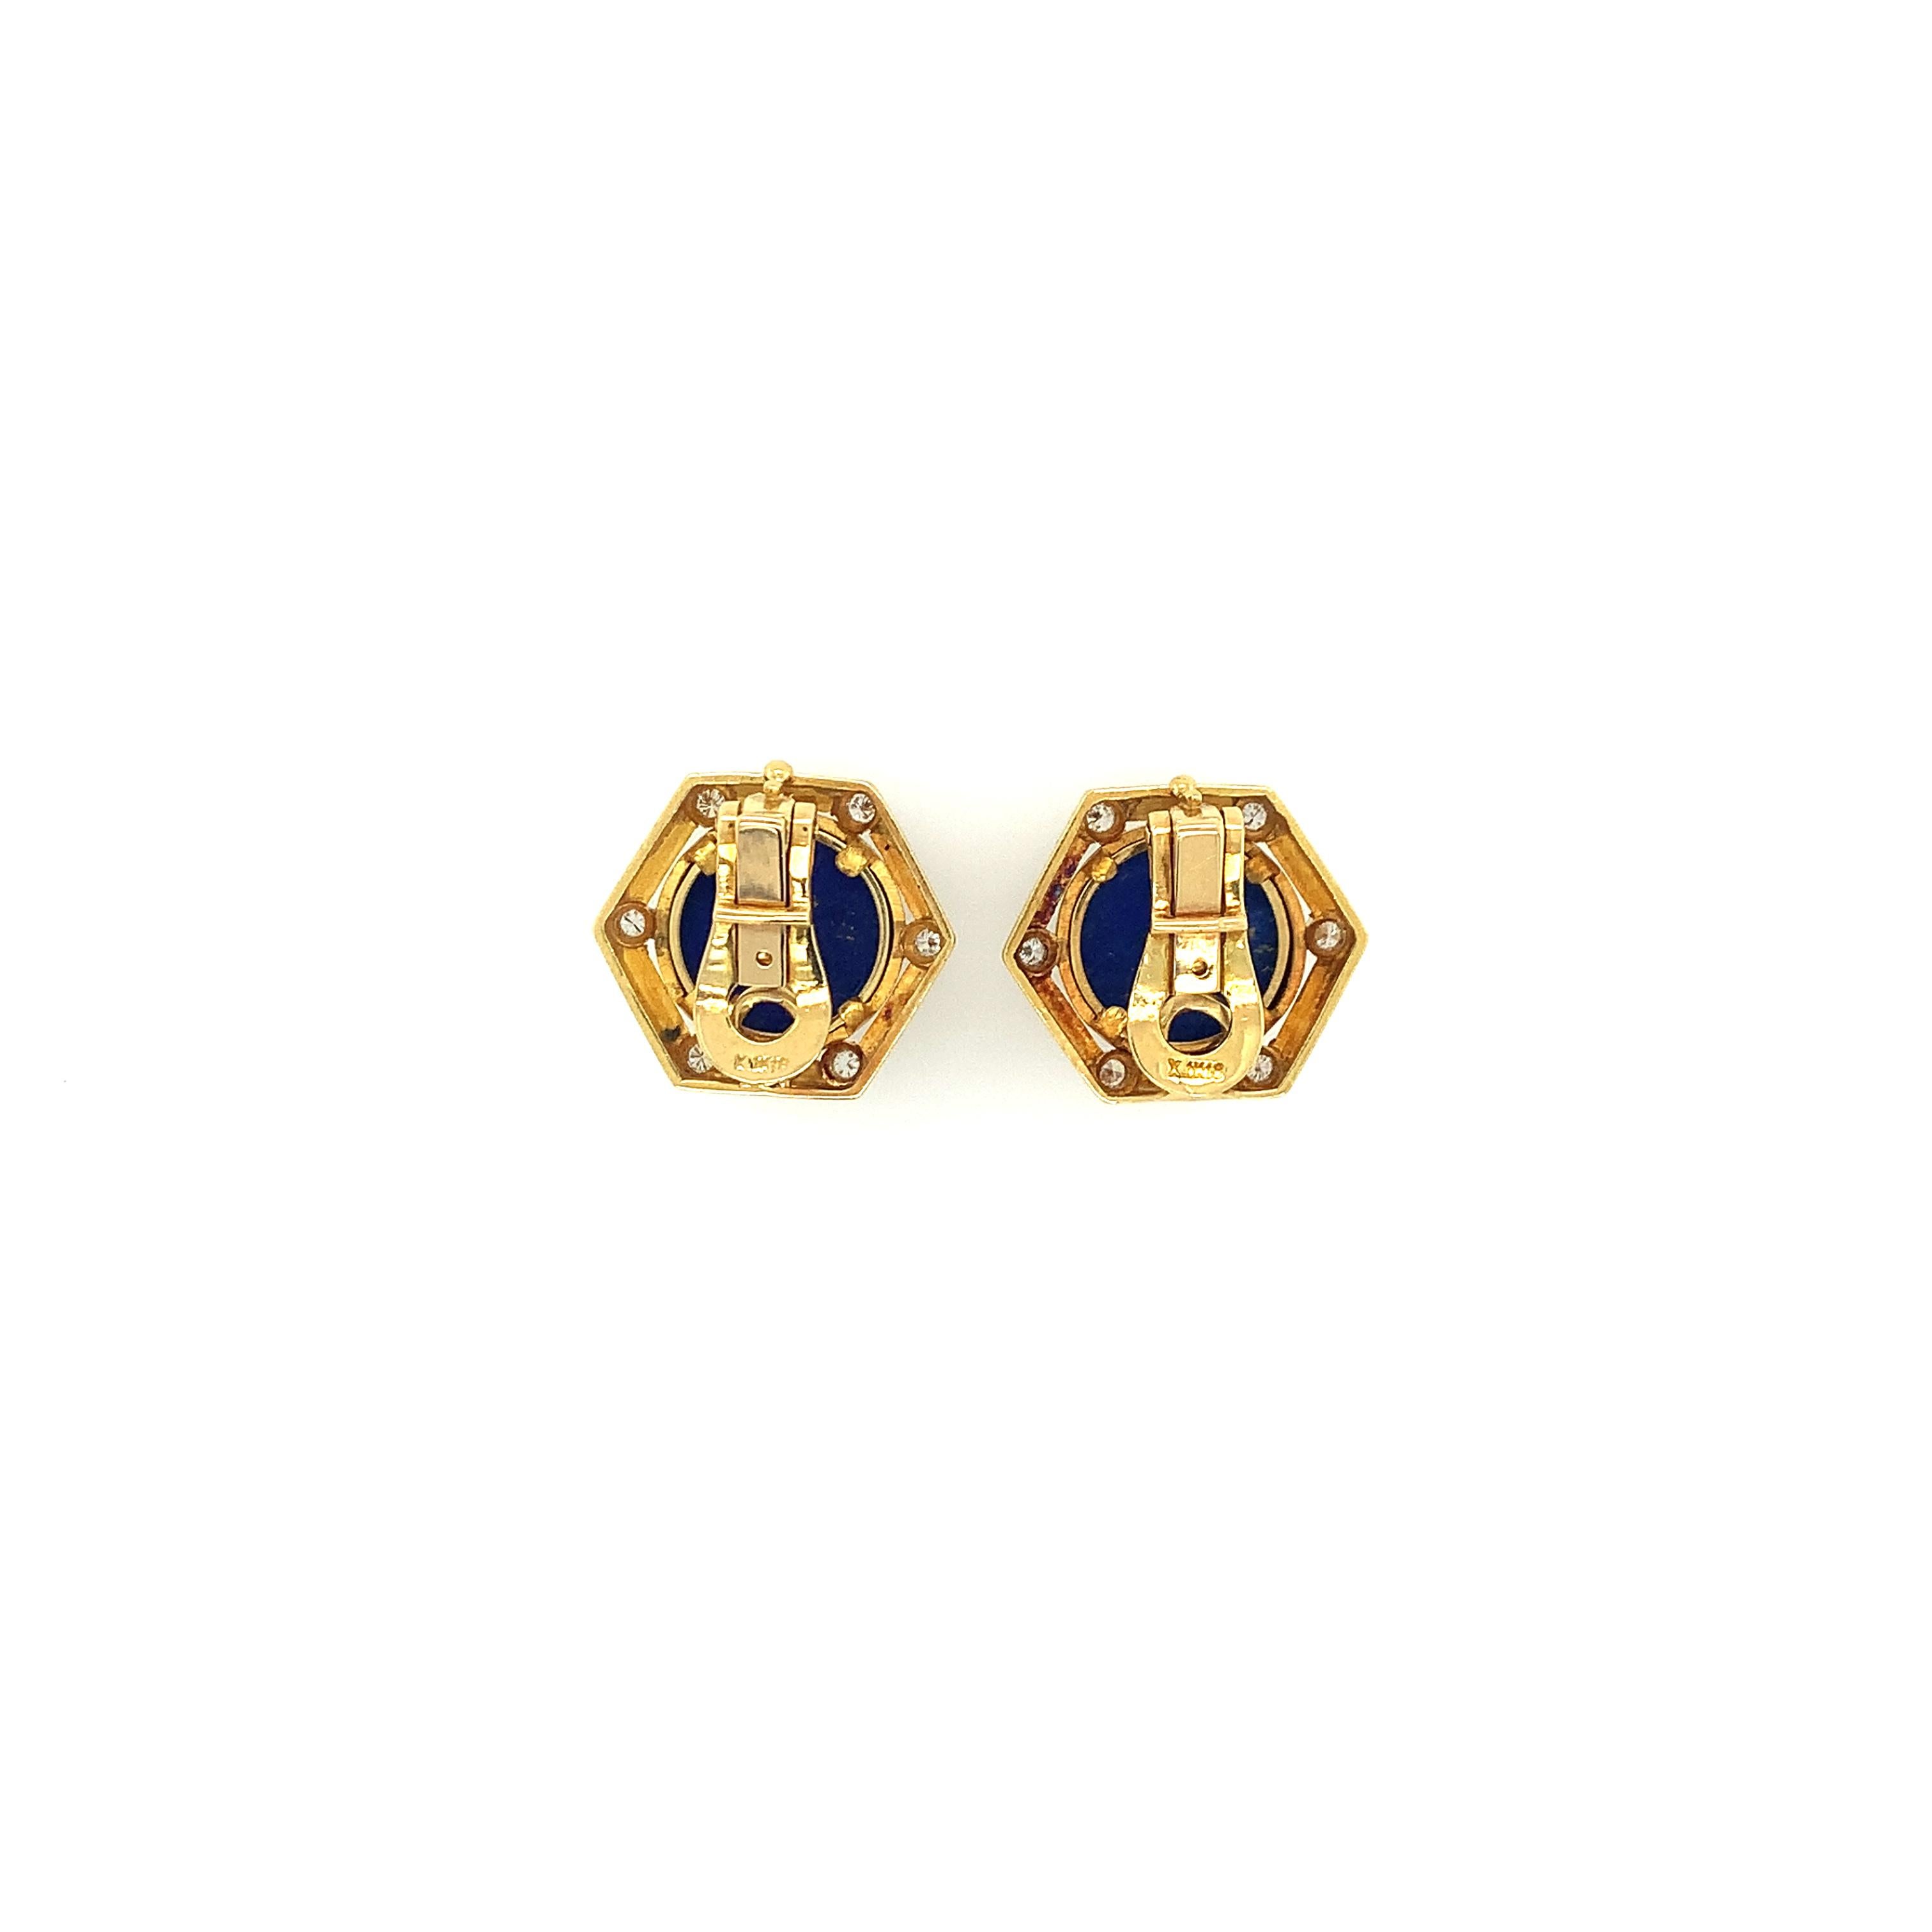 A glamorous pair of 18K yellow gold hexagonal shaped earrings. Featuring a lapis center with prominent sparkling gold flecks, it is surrounded by (6) six round cut diamonds with a total weight of approximately .40 carats. Clip on backs ensure ease